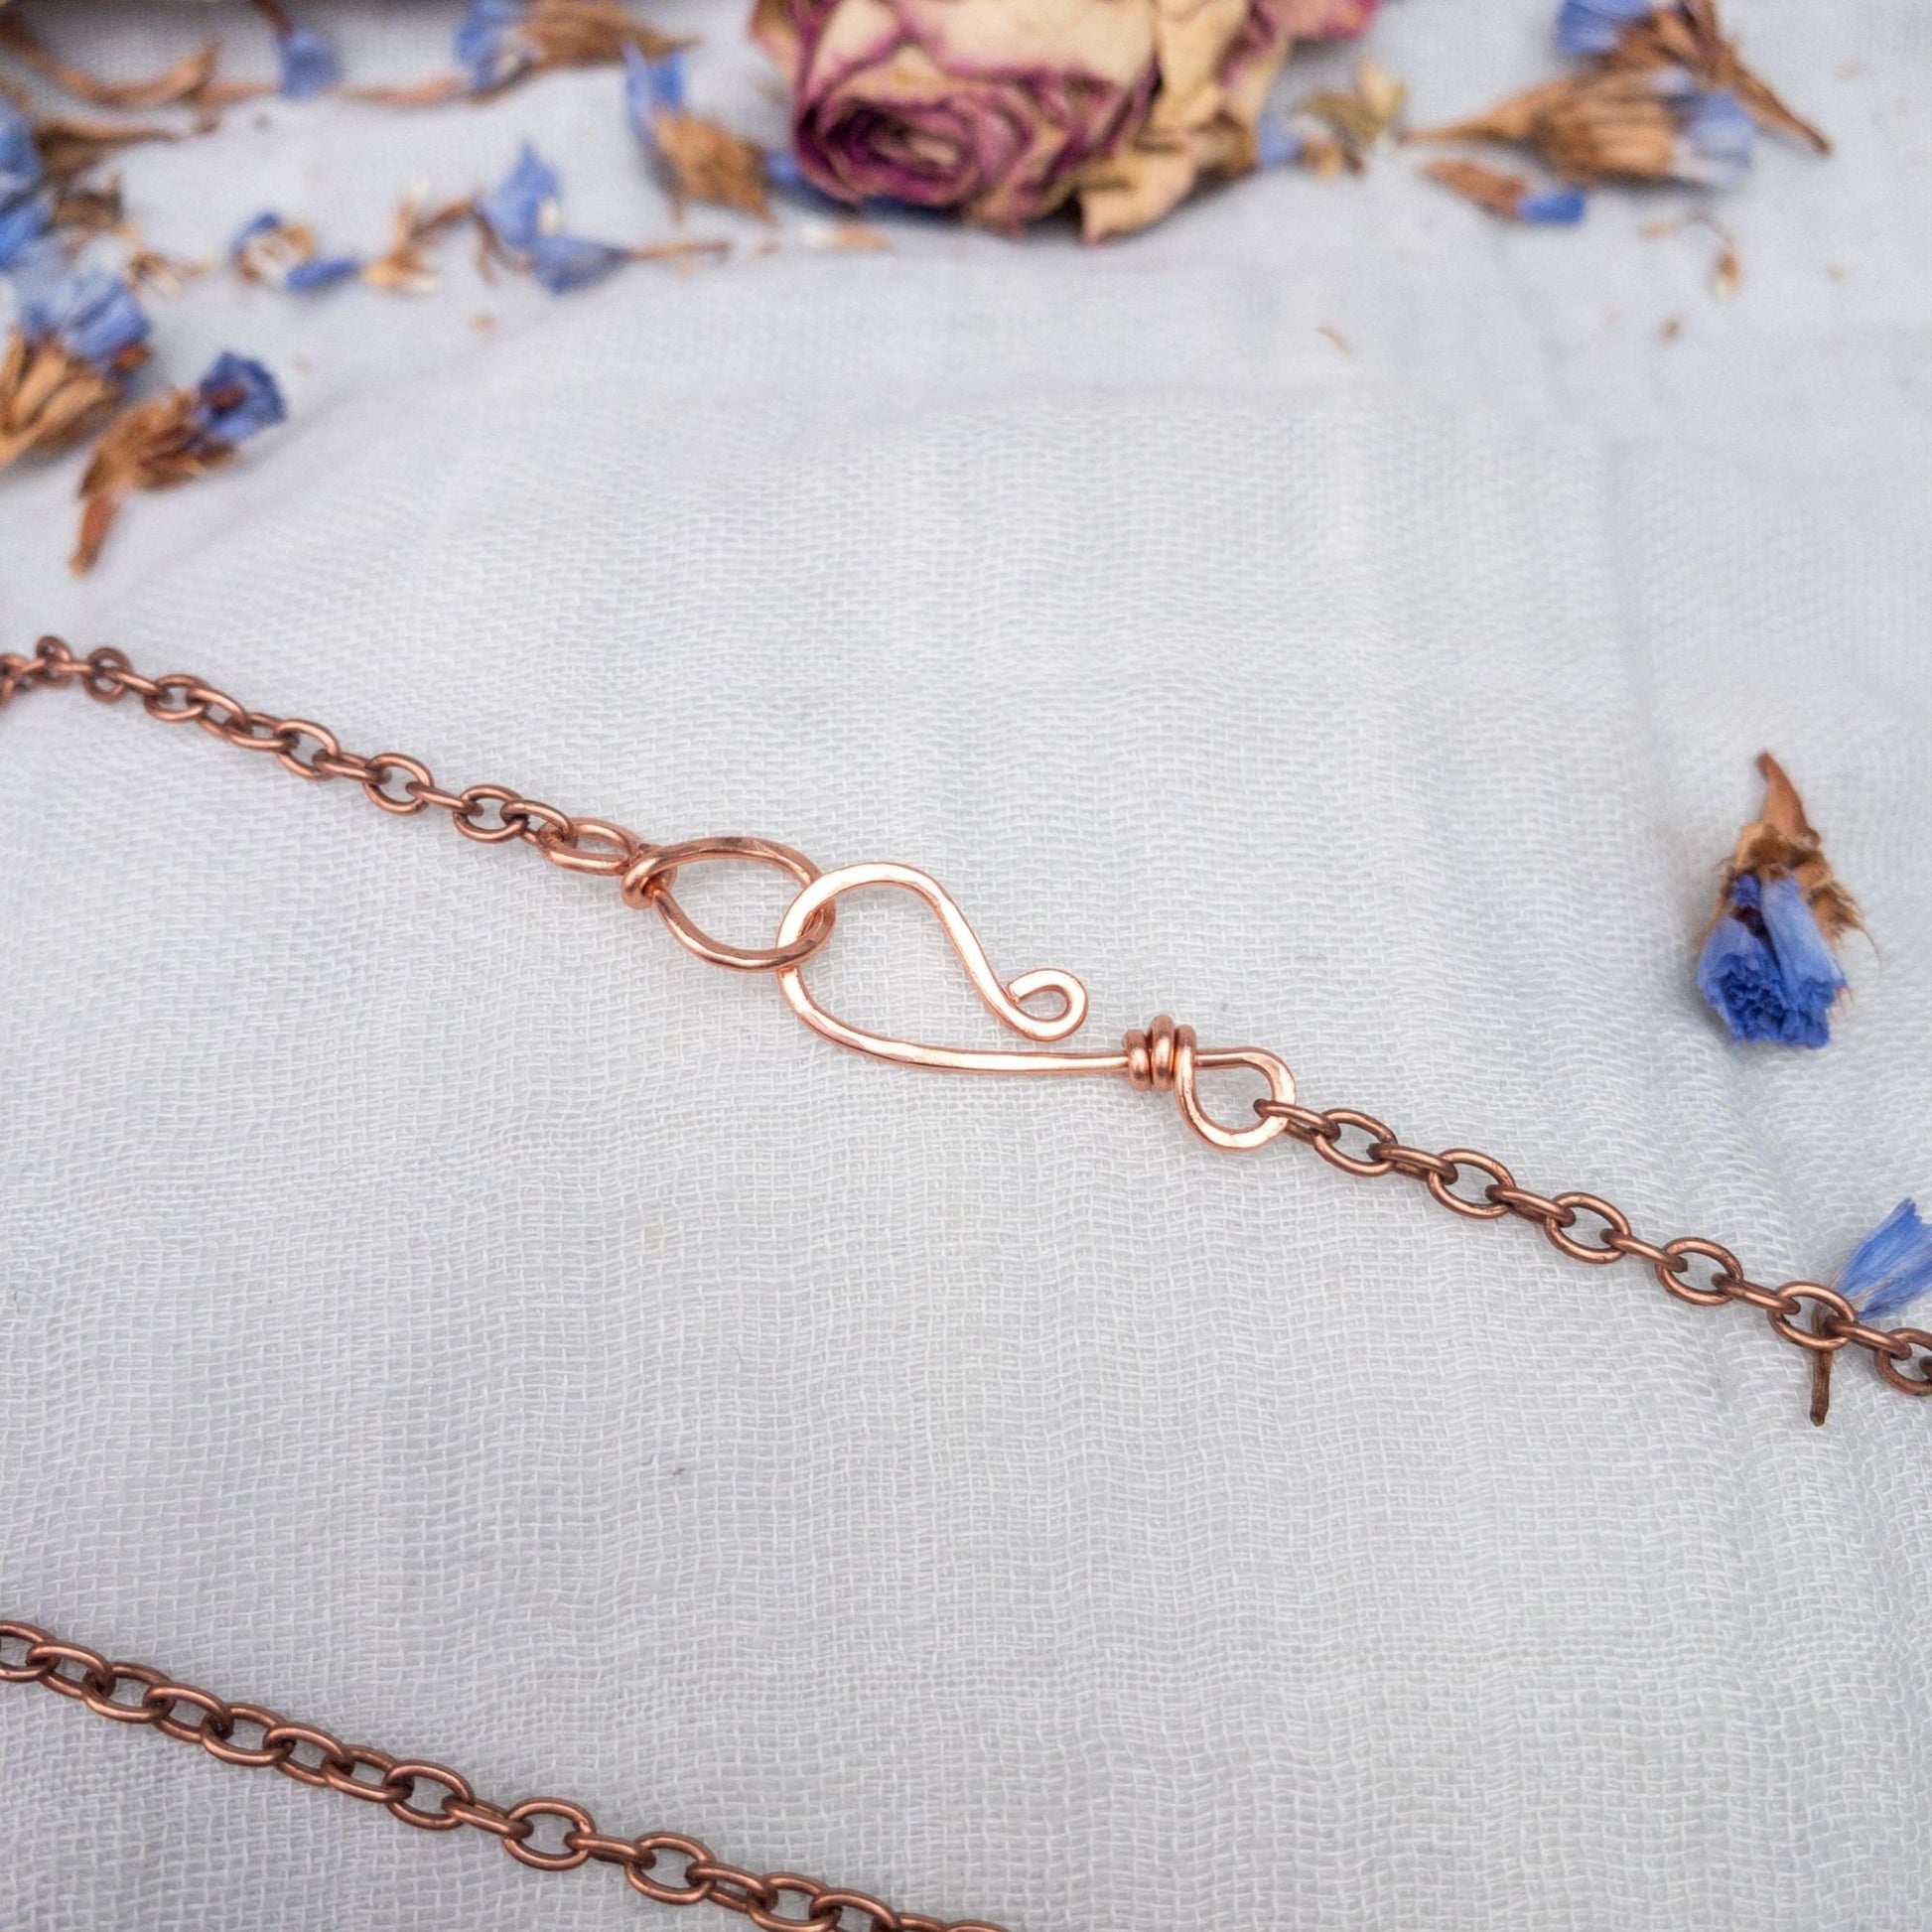 copper chain hand made wire wrap organic look clasp